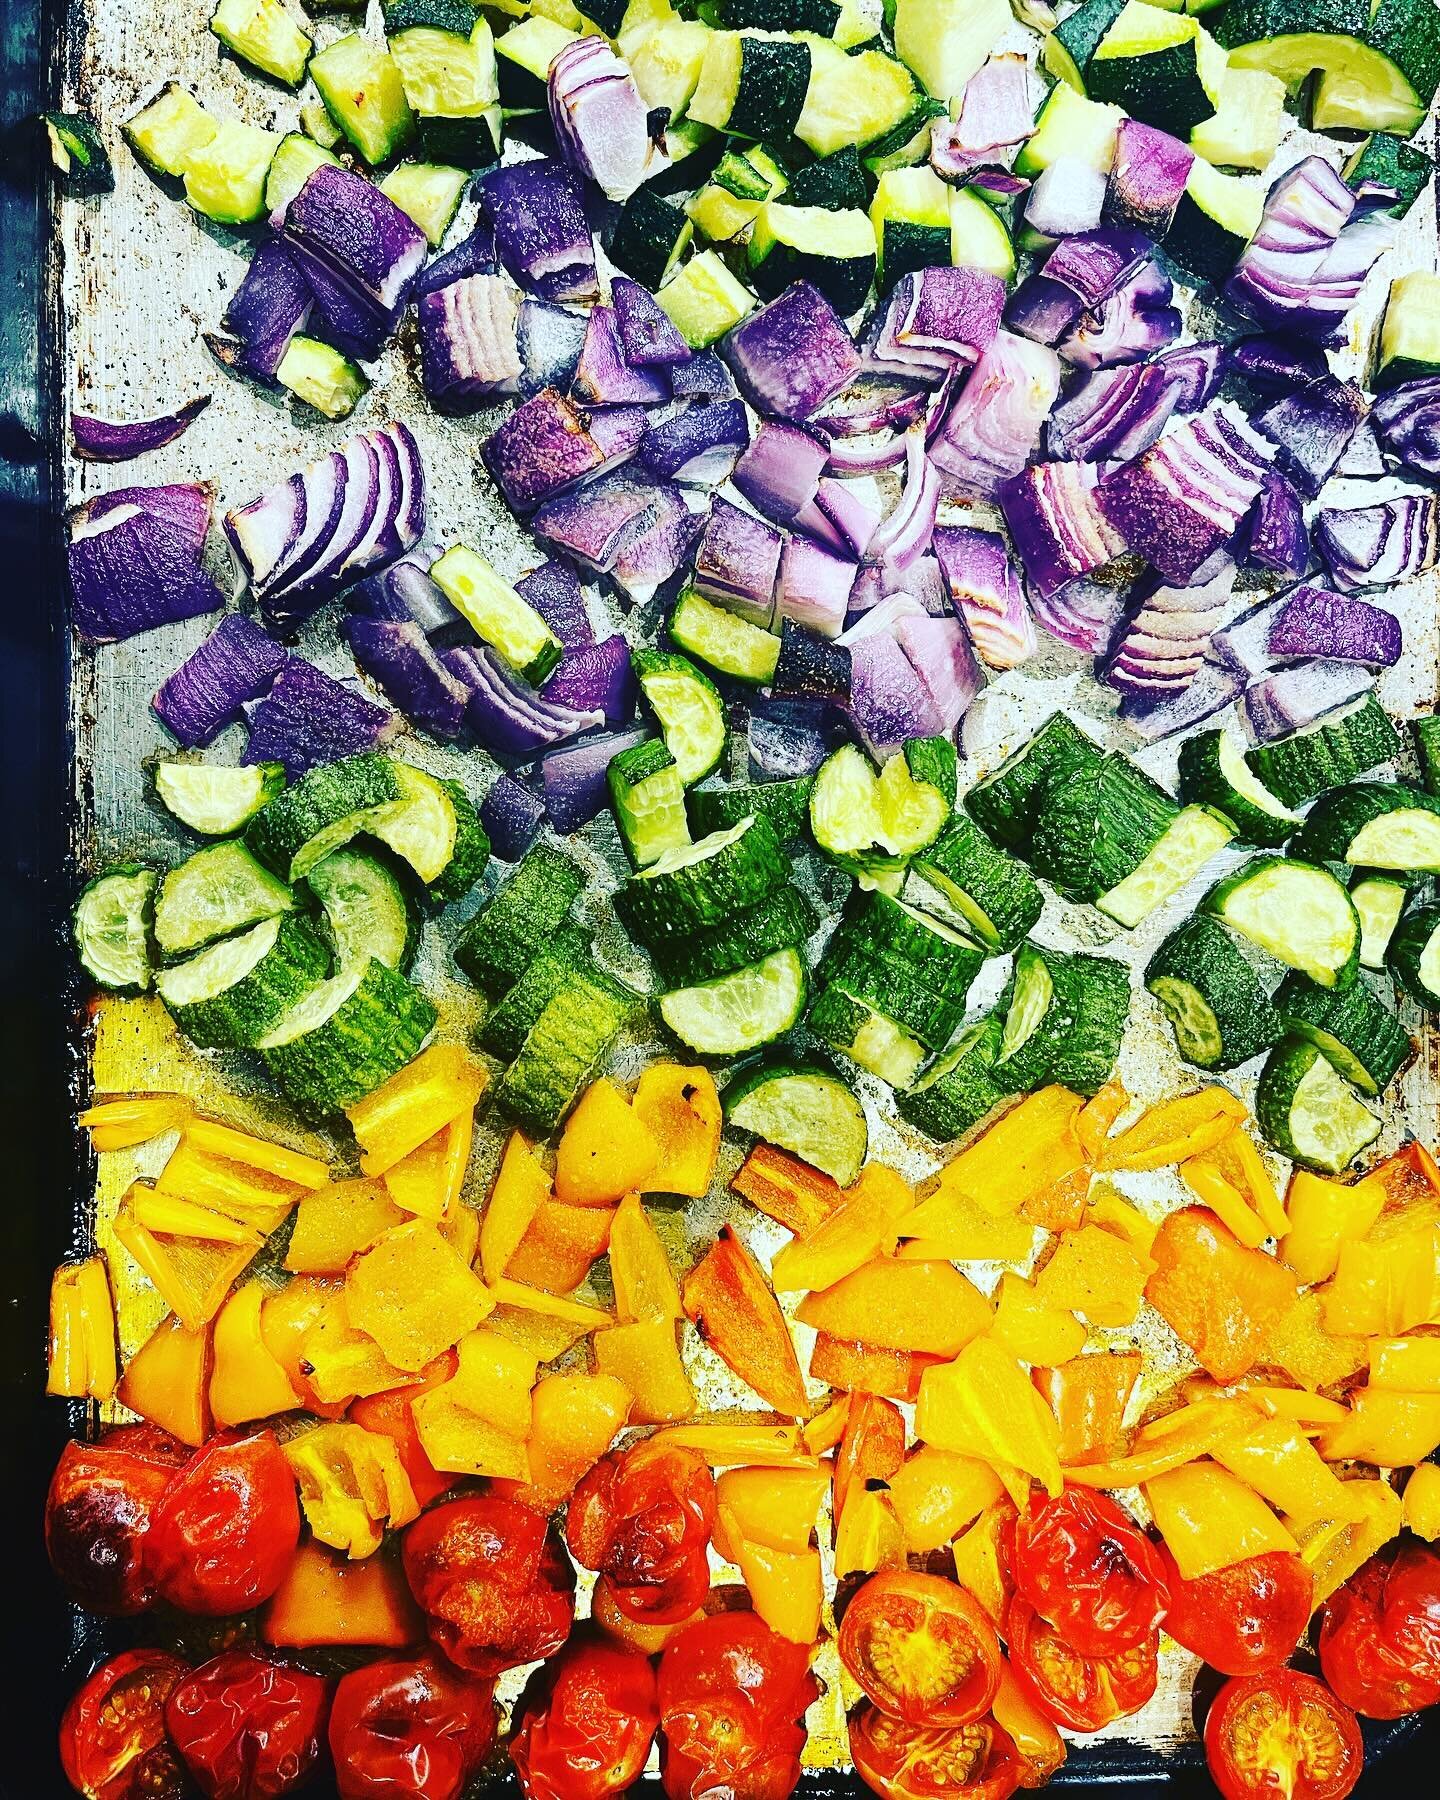 Seriously one of my favorite foods&hellip; roasted vegetables ❤️ So easy: Chop, toss with olive oil, &amp; season. This batch I sprinkled with garlic powder, pepper, roast at 425 F for 25 minutes.

This batch was transformed into Panzanella Salad Bow